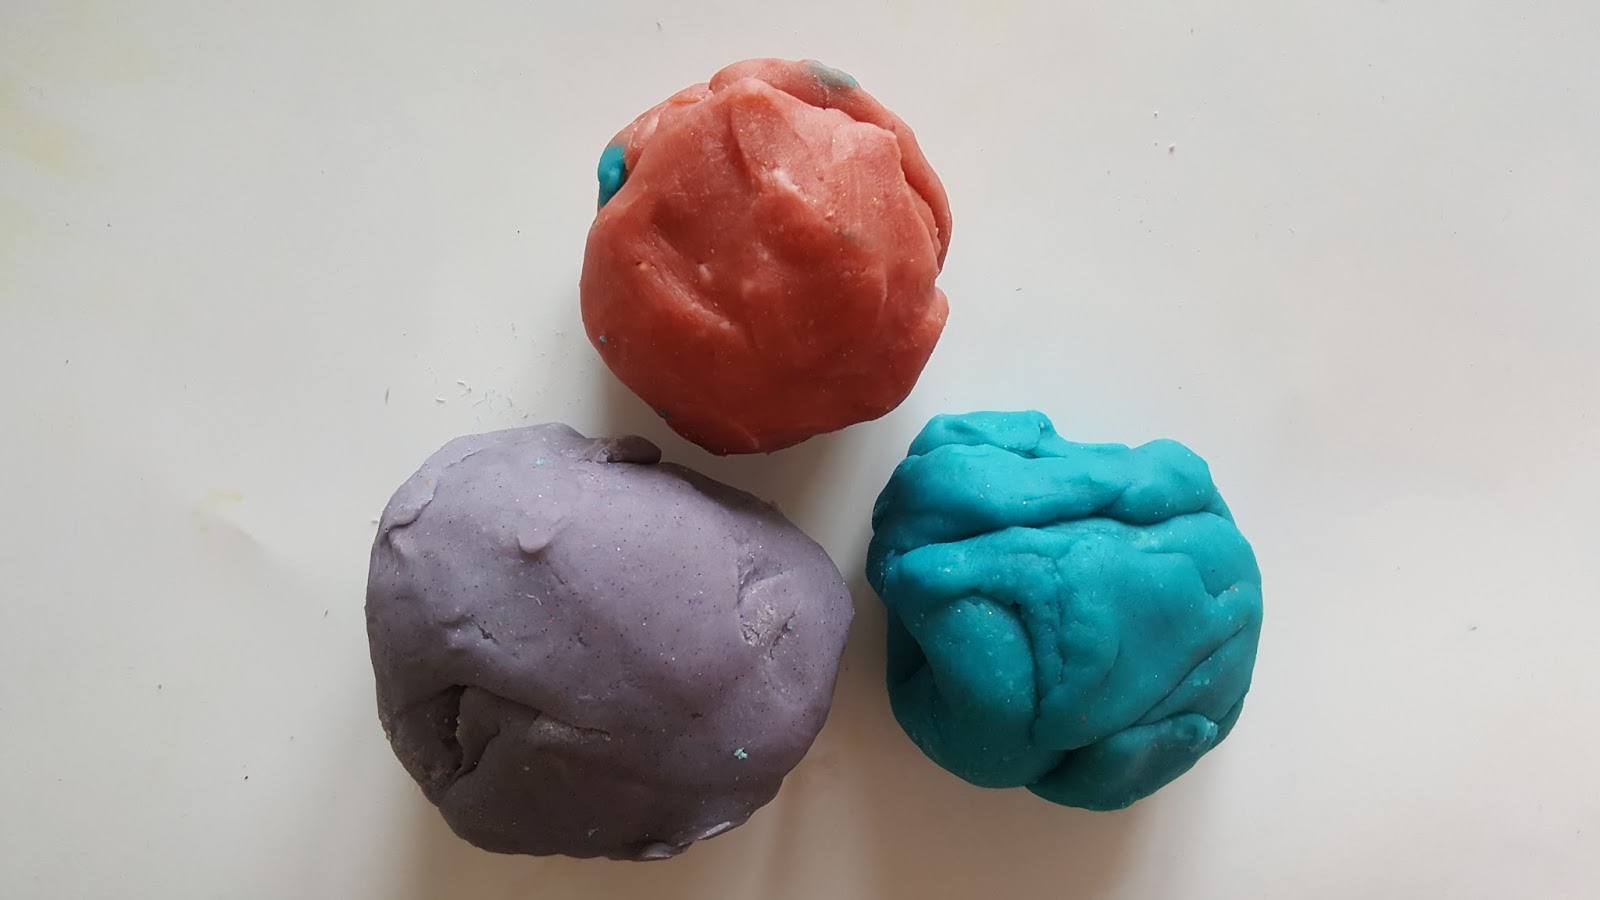 learning colours with play doh